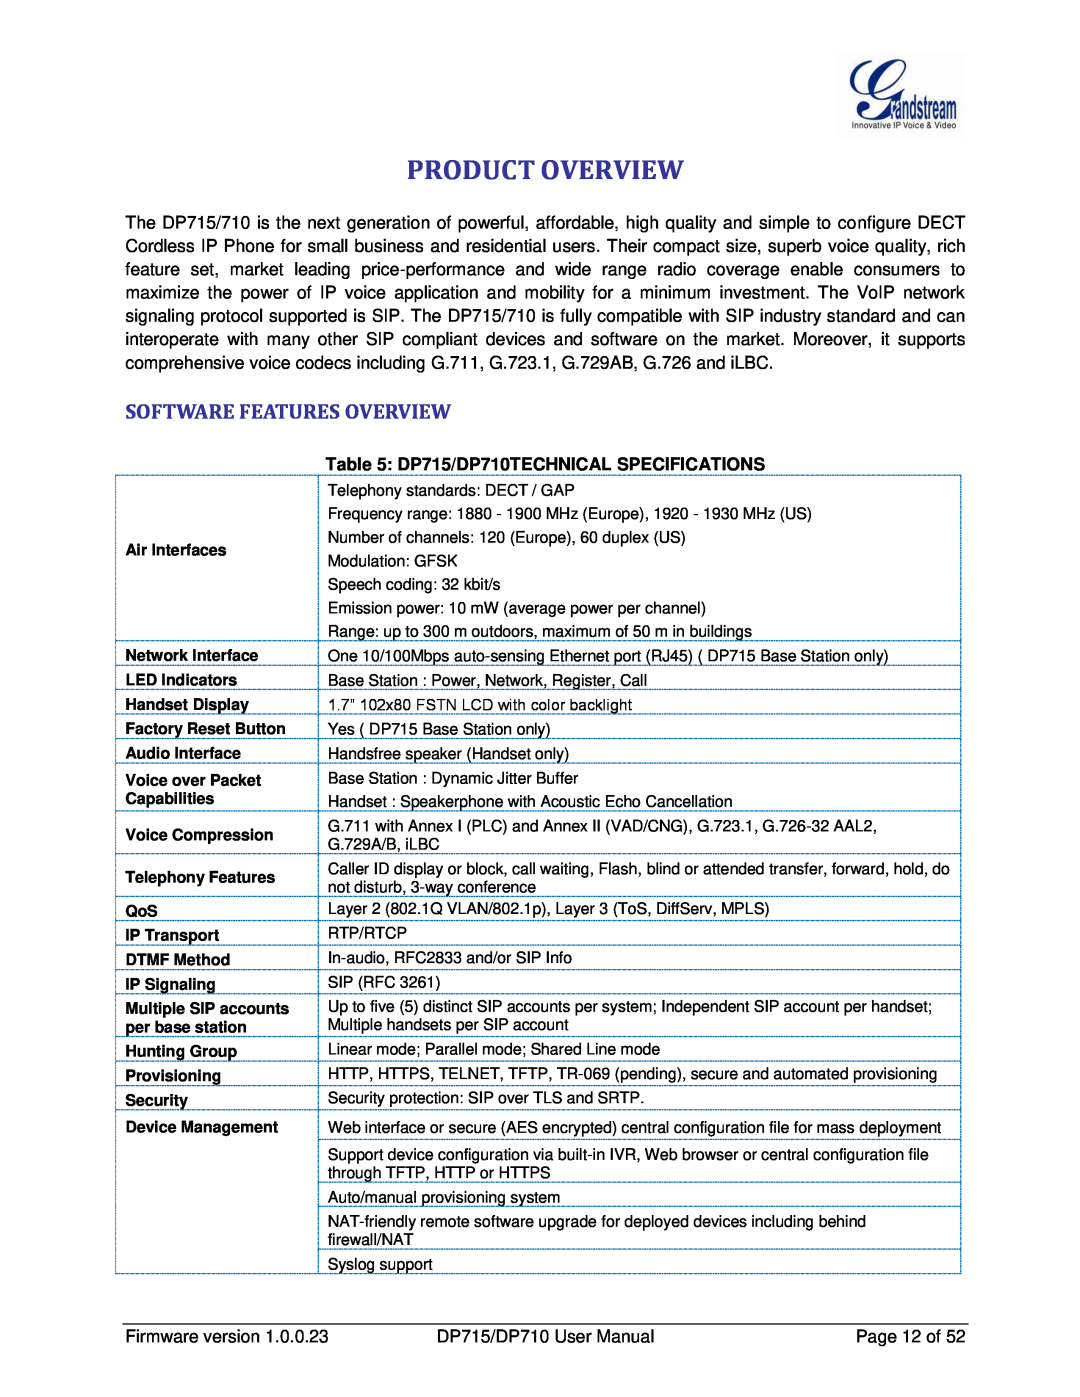 Grandstream Networks DP710 manual Product Overview, Software Features Overview 